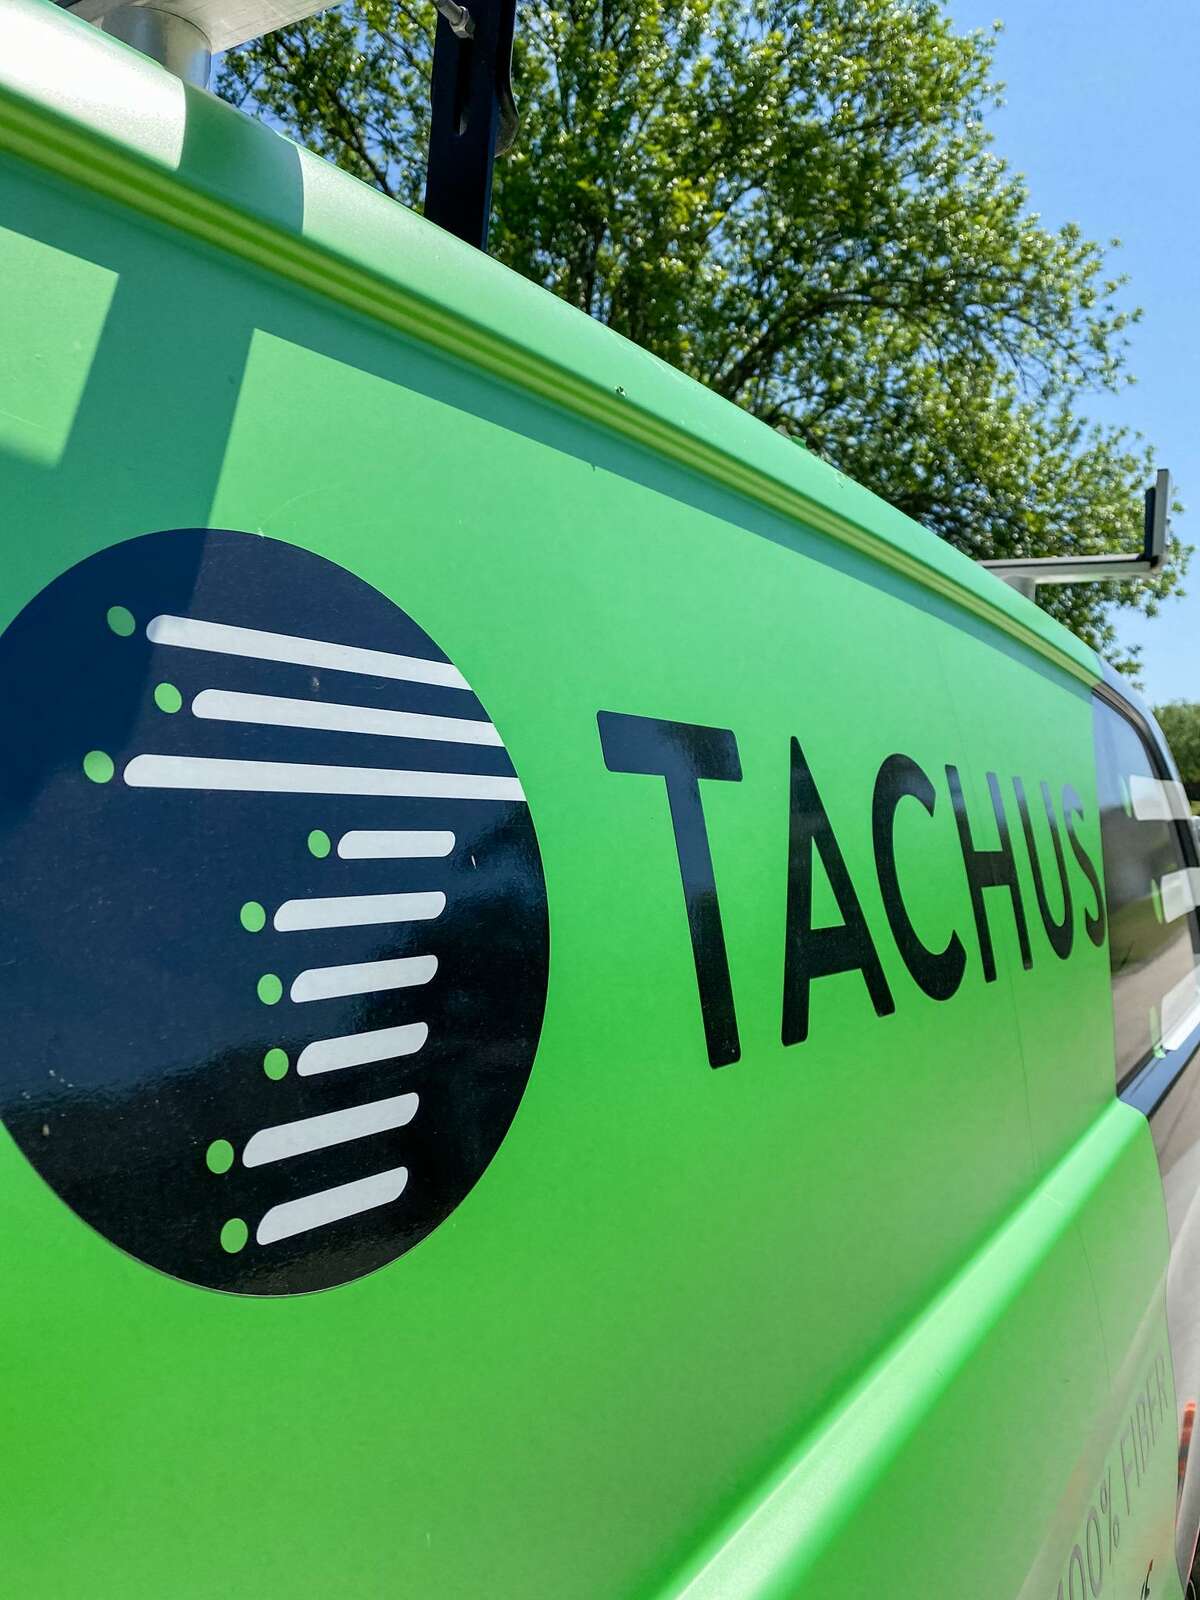 The side of a Tachus van with their logo.